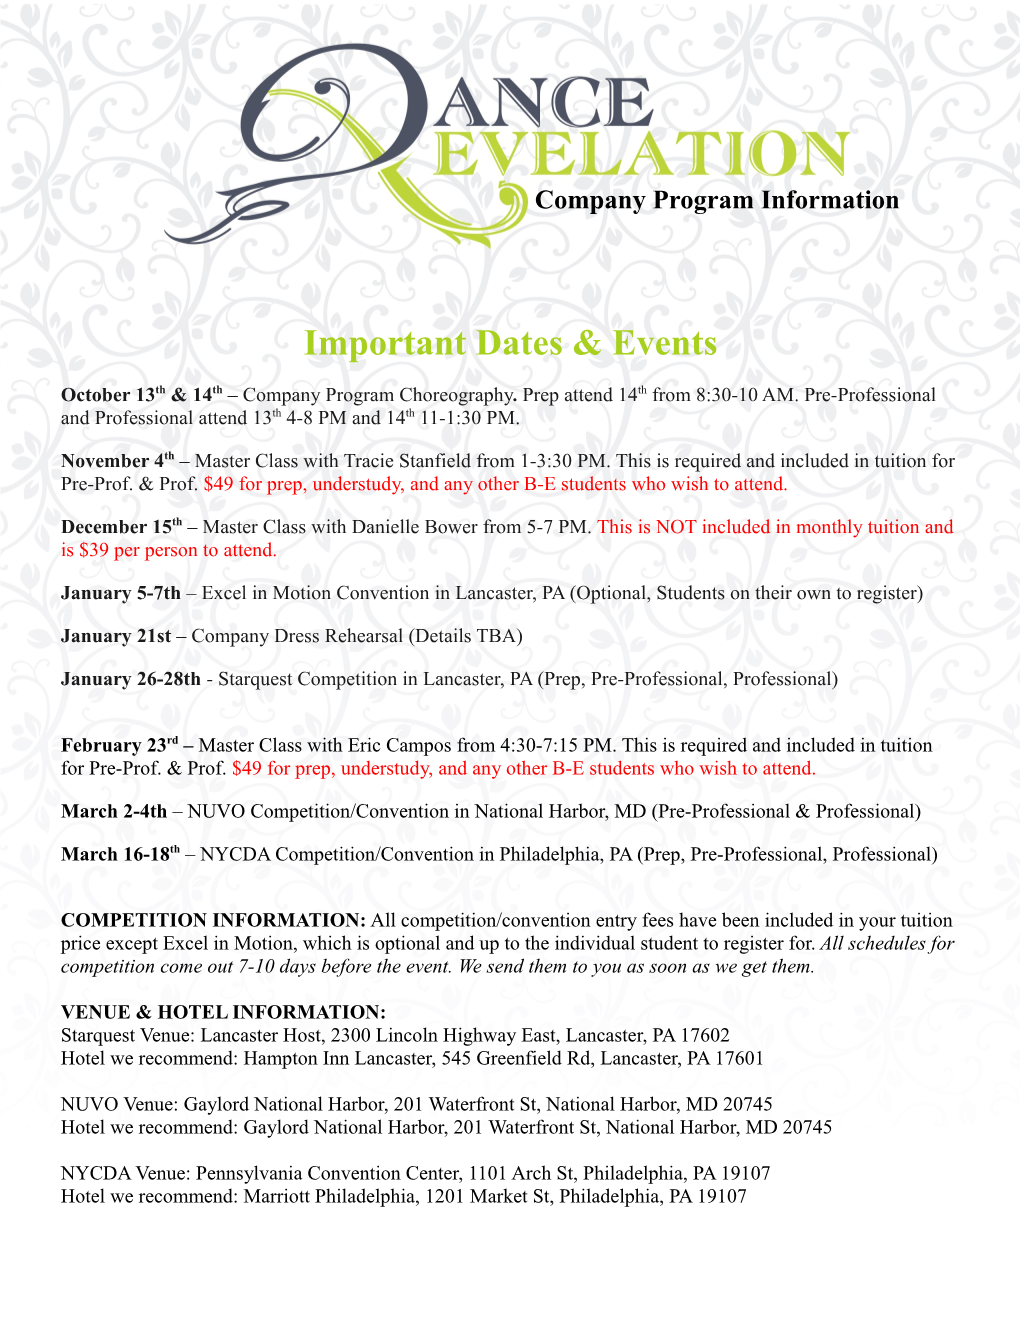 Important Dates & Events